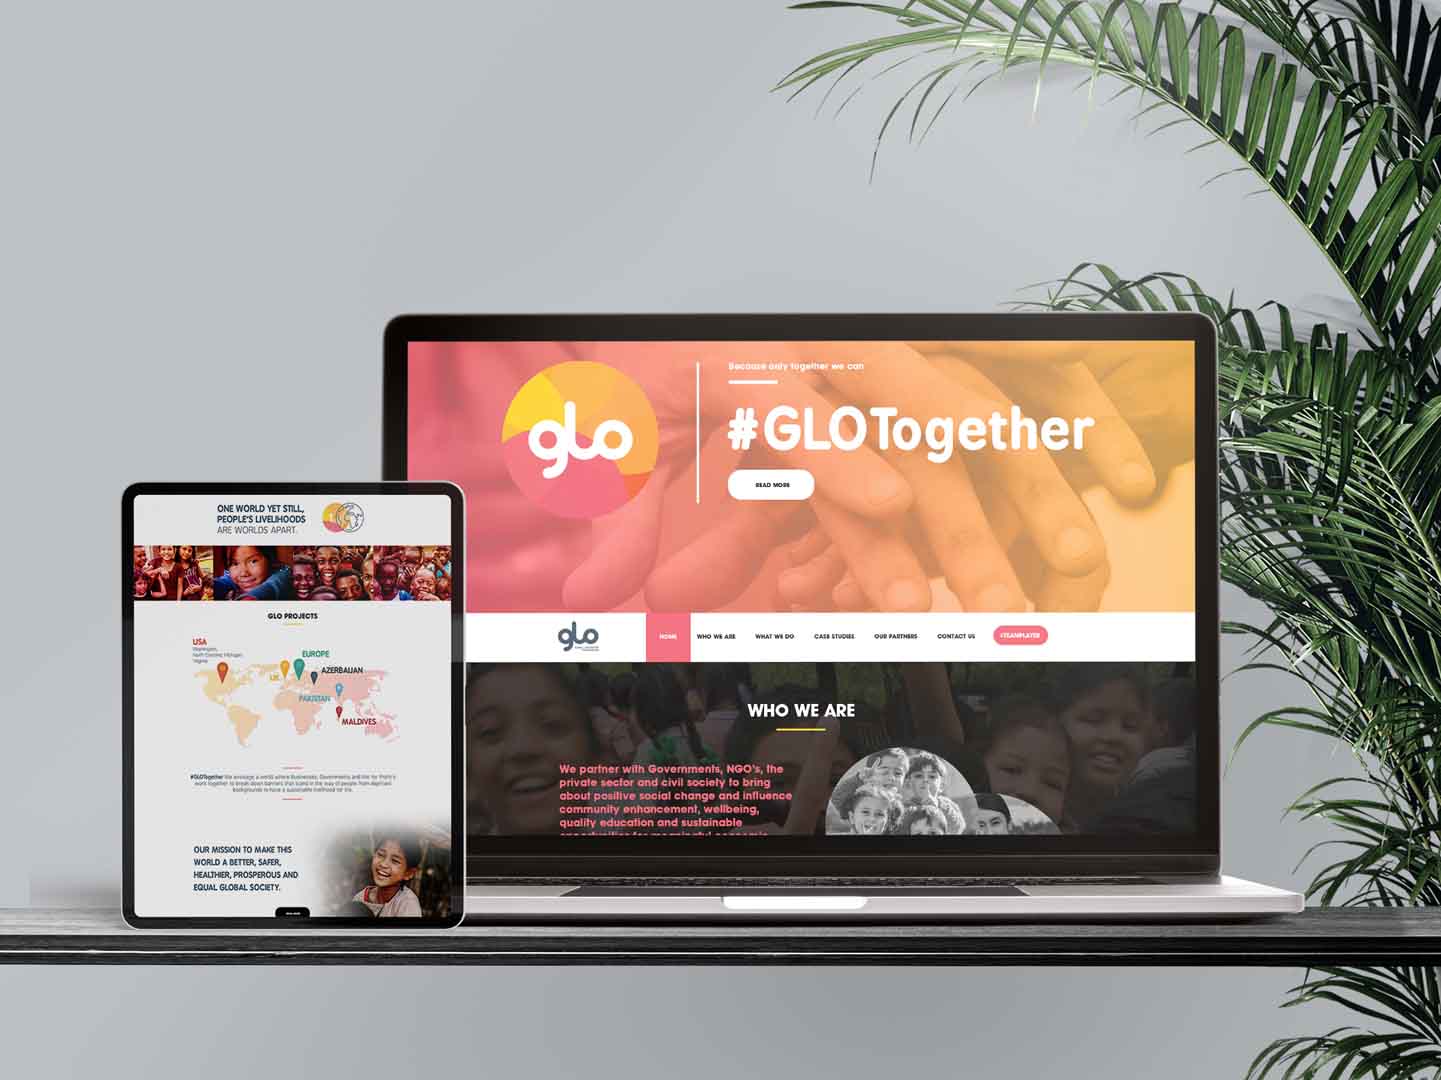 Glo together website displayed on a laptop and tablet